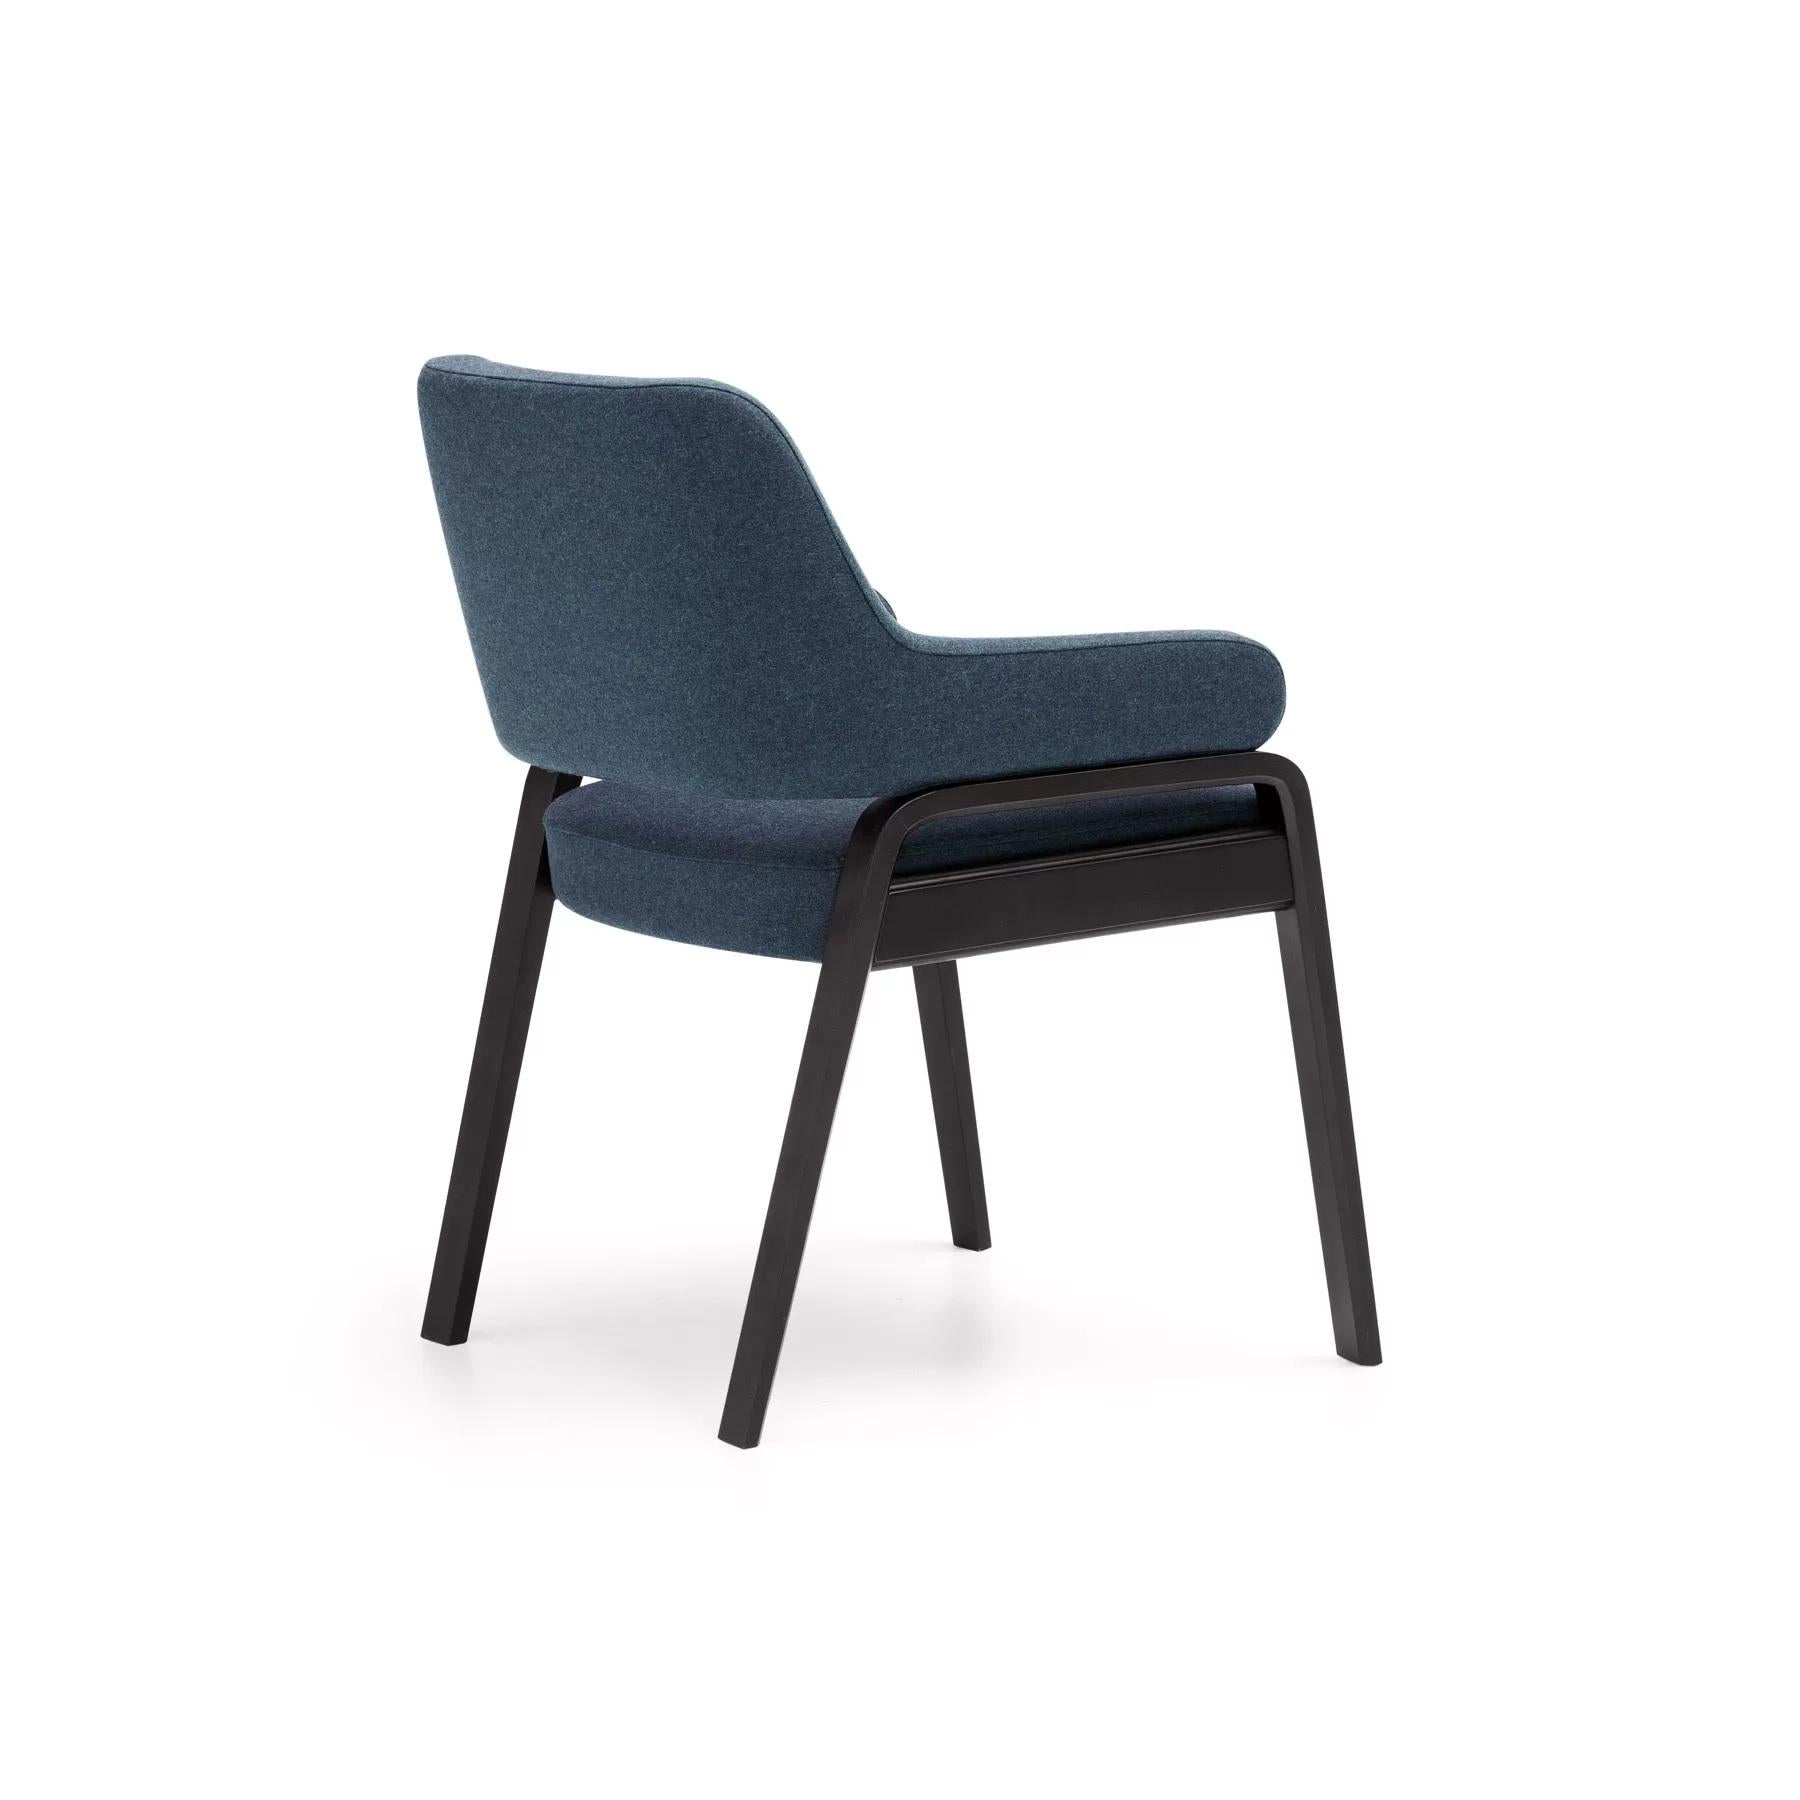 Contemporary and sophisticated line of dining armchair, lounge chair and dining bench. The design is structured around the legs, which support the seat and backrest. Two flat profiles run from the same point along the base and backrest in an